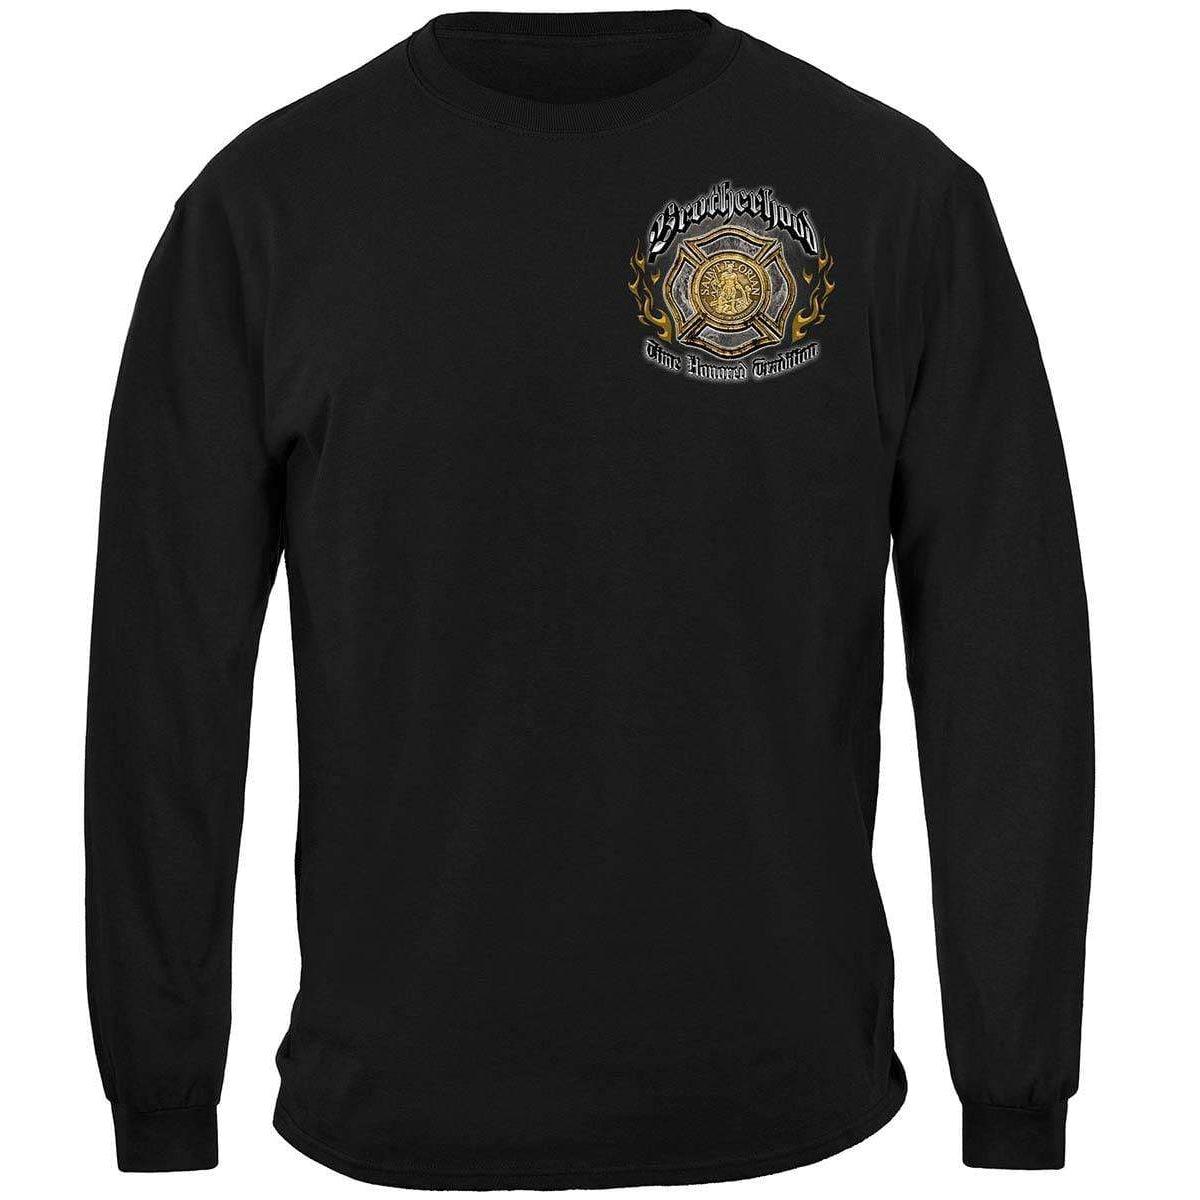 Firefighter Time Honor Tradition Premium T-shirt - Military Republic